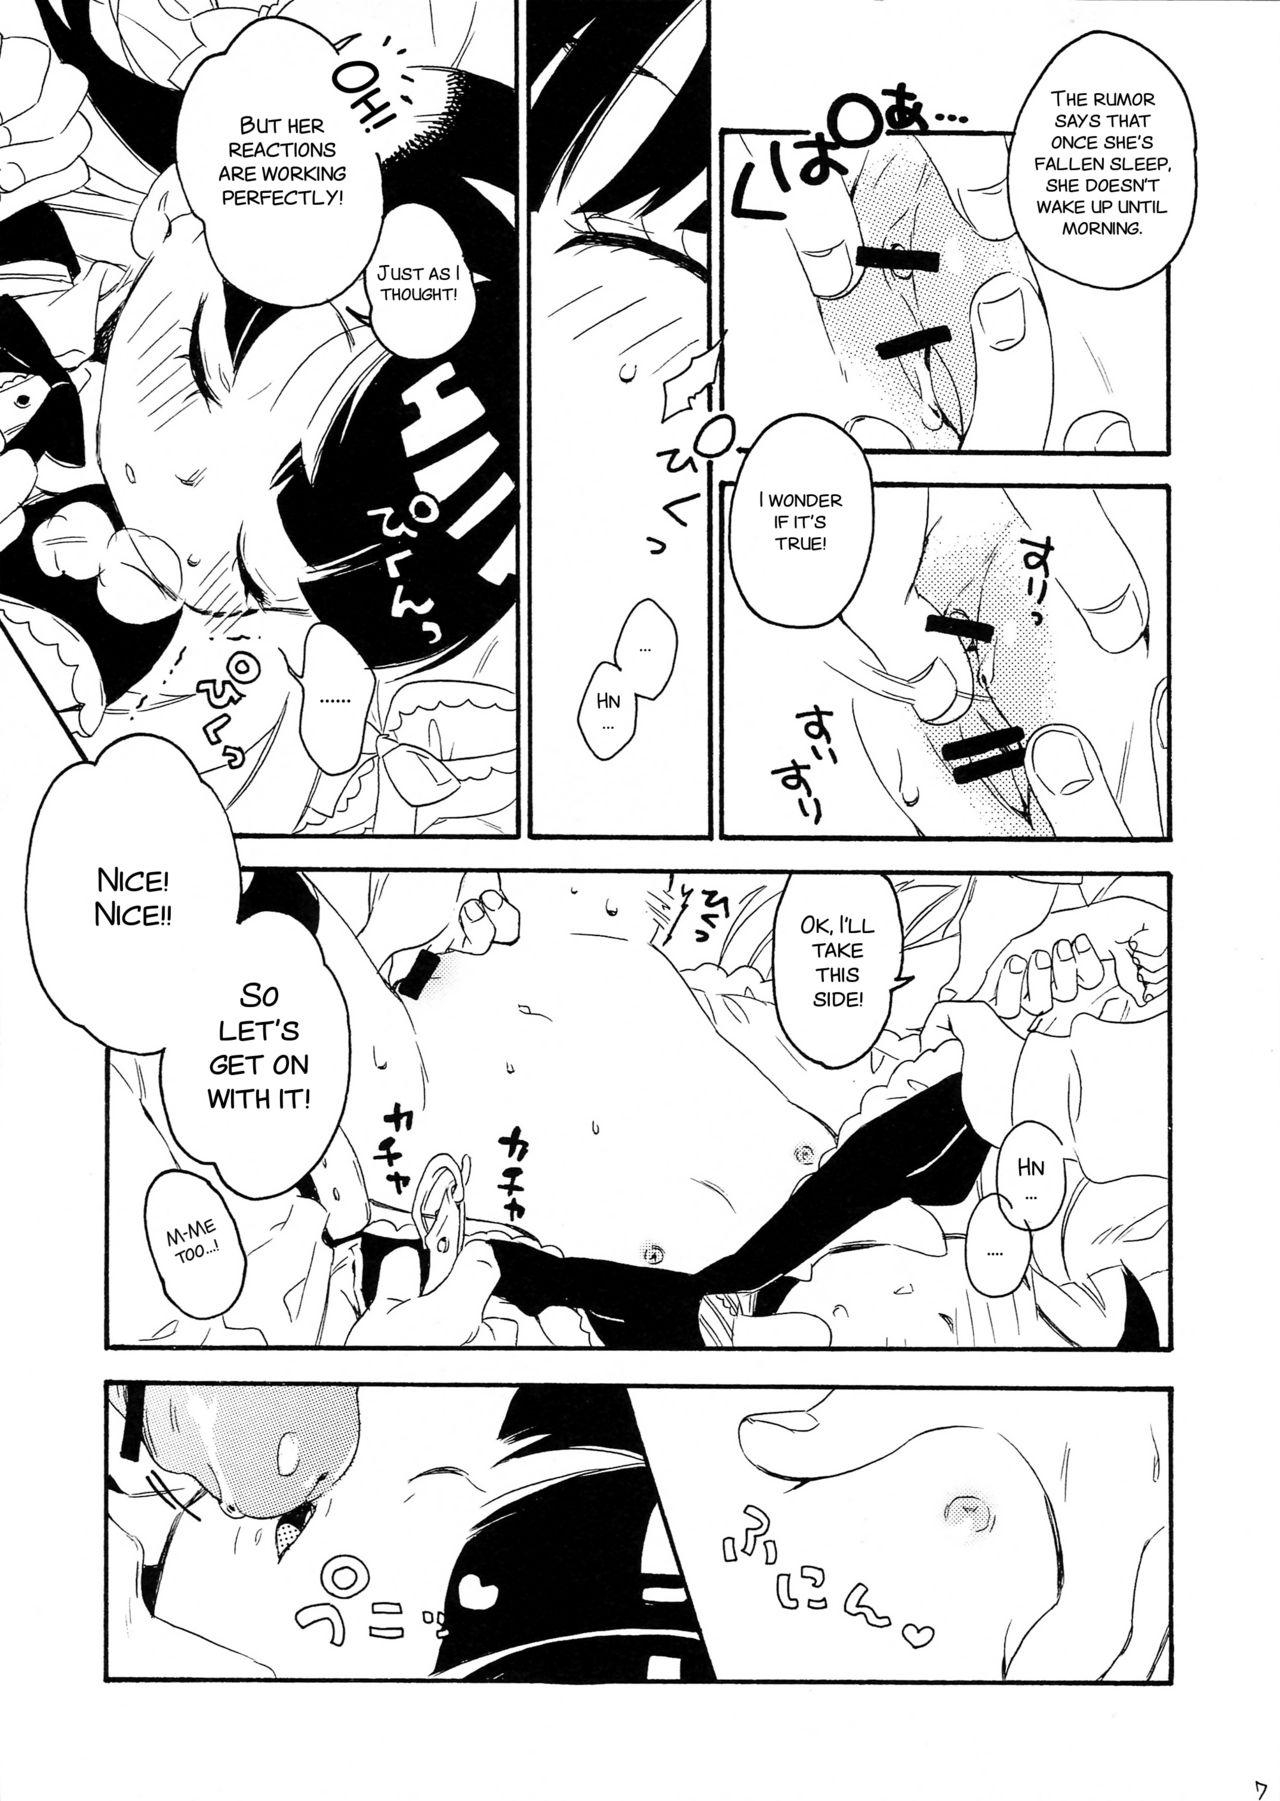 Amigo Stop Daydreaming! - Panty and stocking with garterbelt Dirty Talk - Page 7